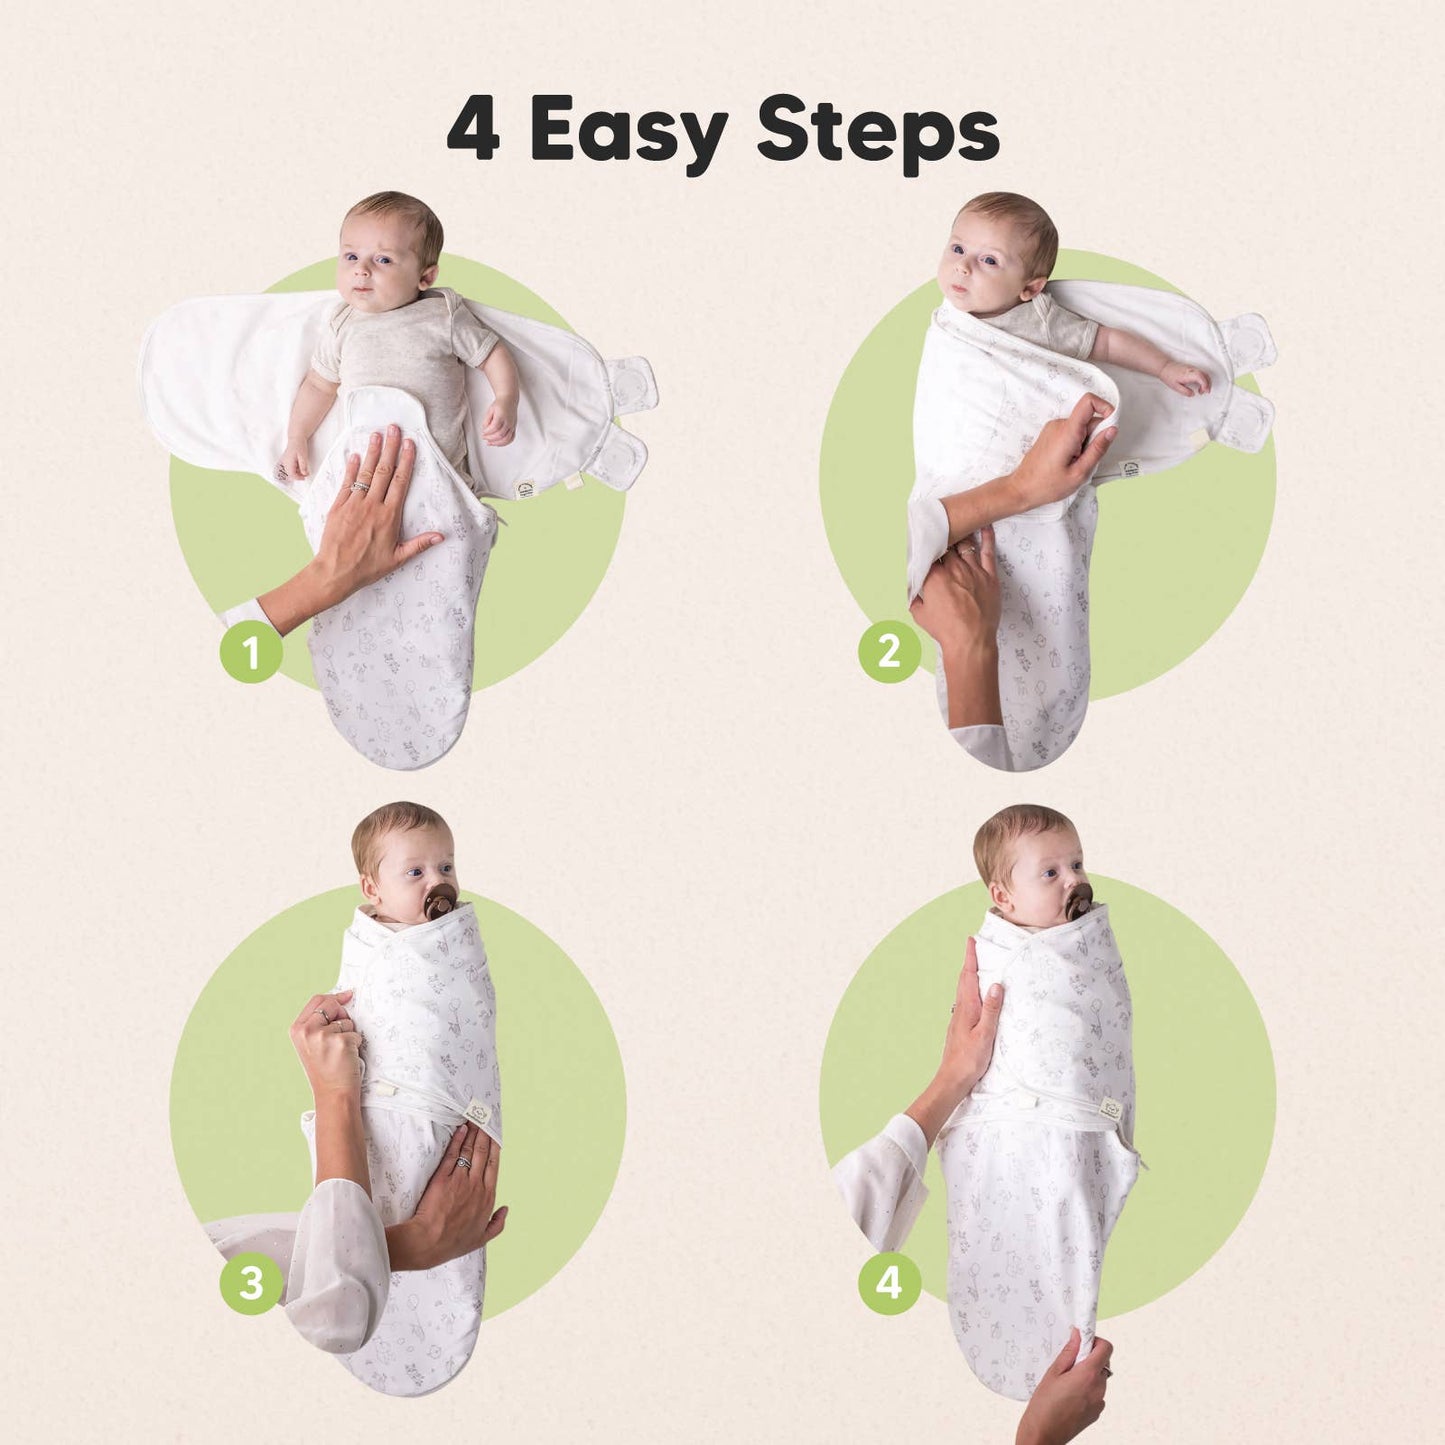 3pk Soothe Zippy Baby Swaddles 0-3 Months